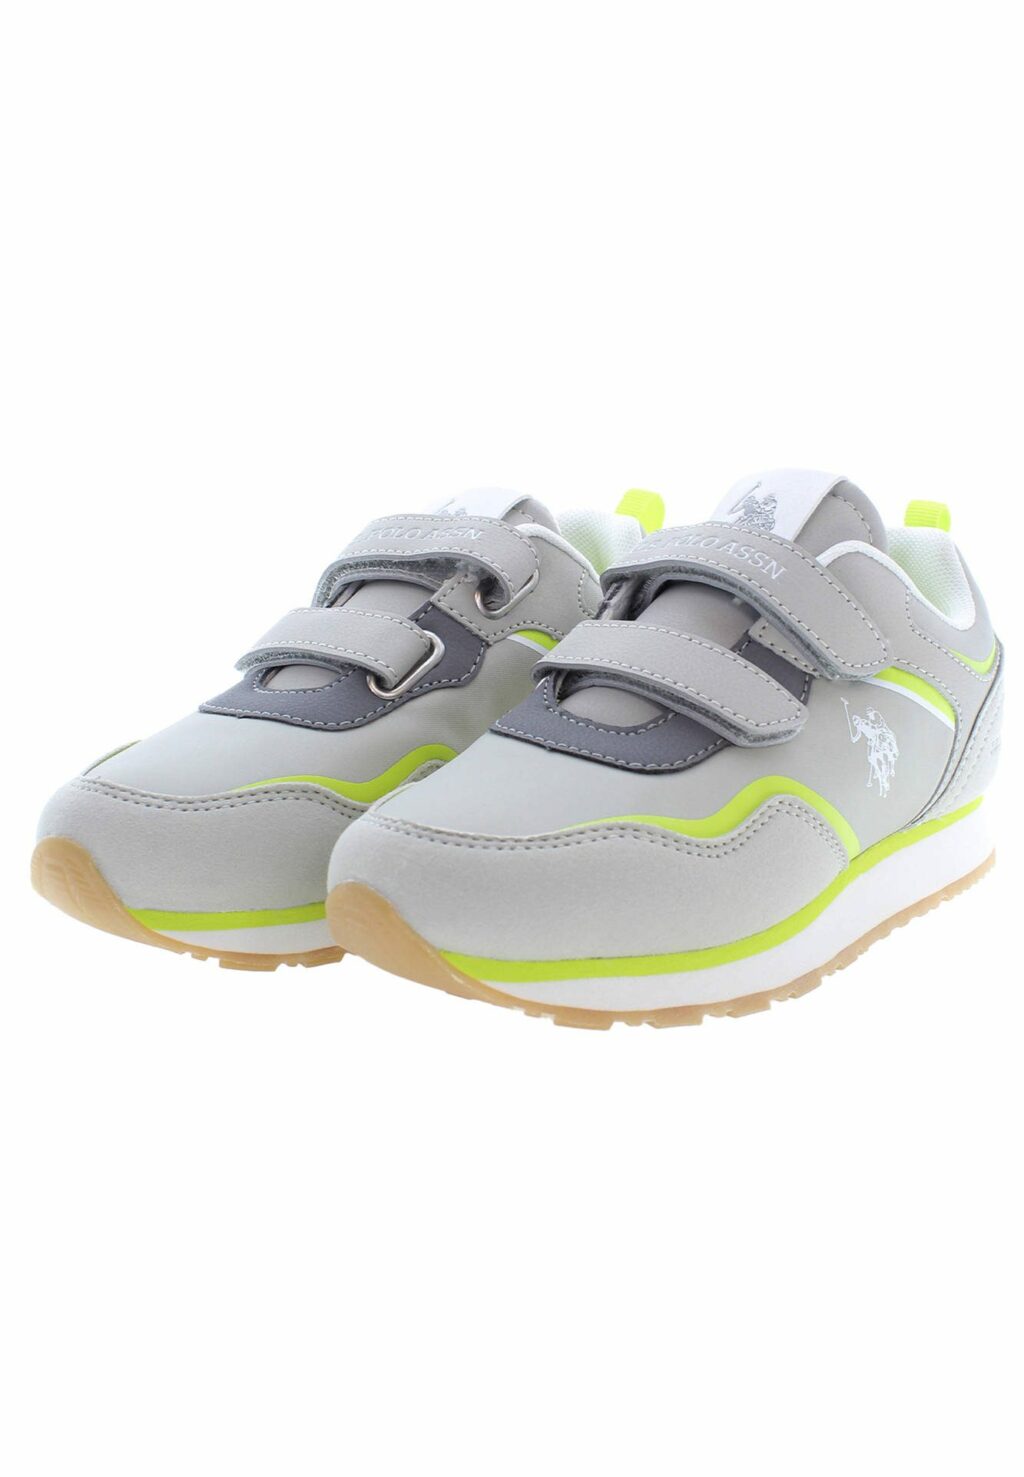 US POLO BEST PRICE SPORTS SHOES FOR KIDS NOBIK009K3NH1_GRIGIO_LGR-LGE02